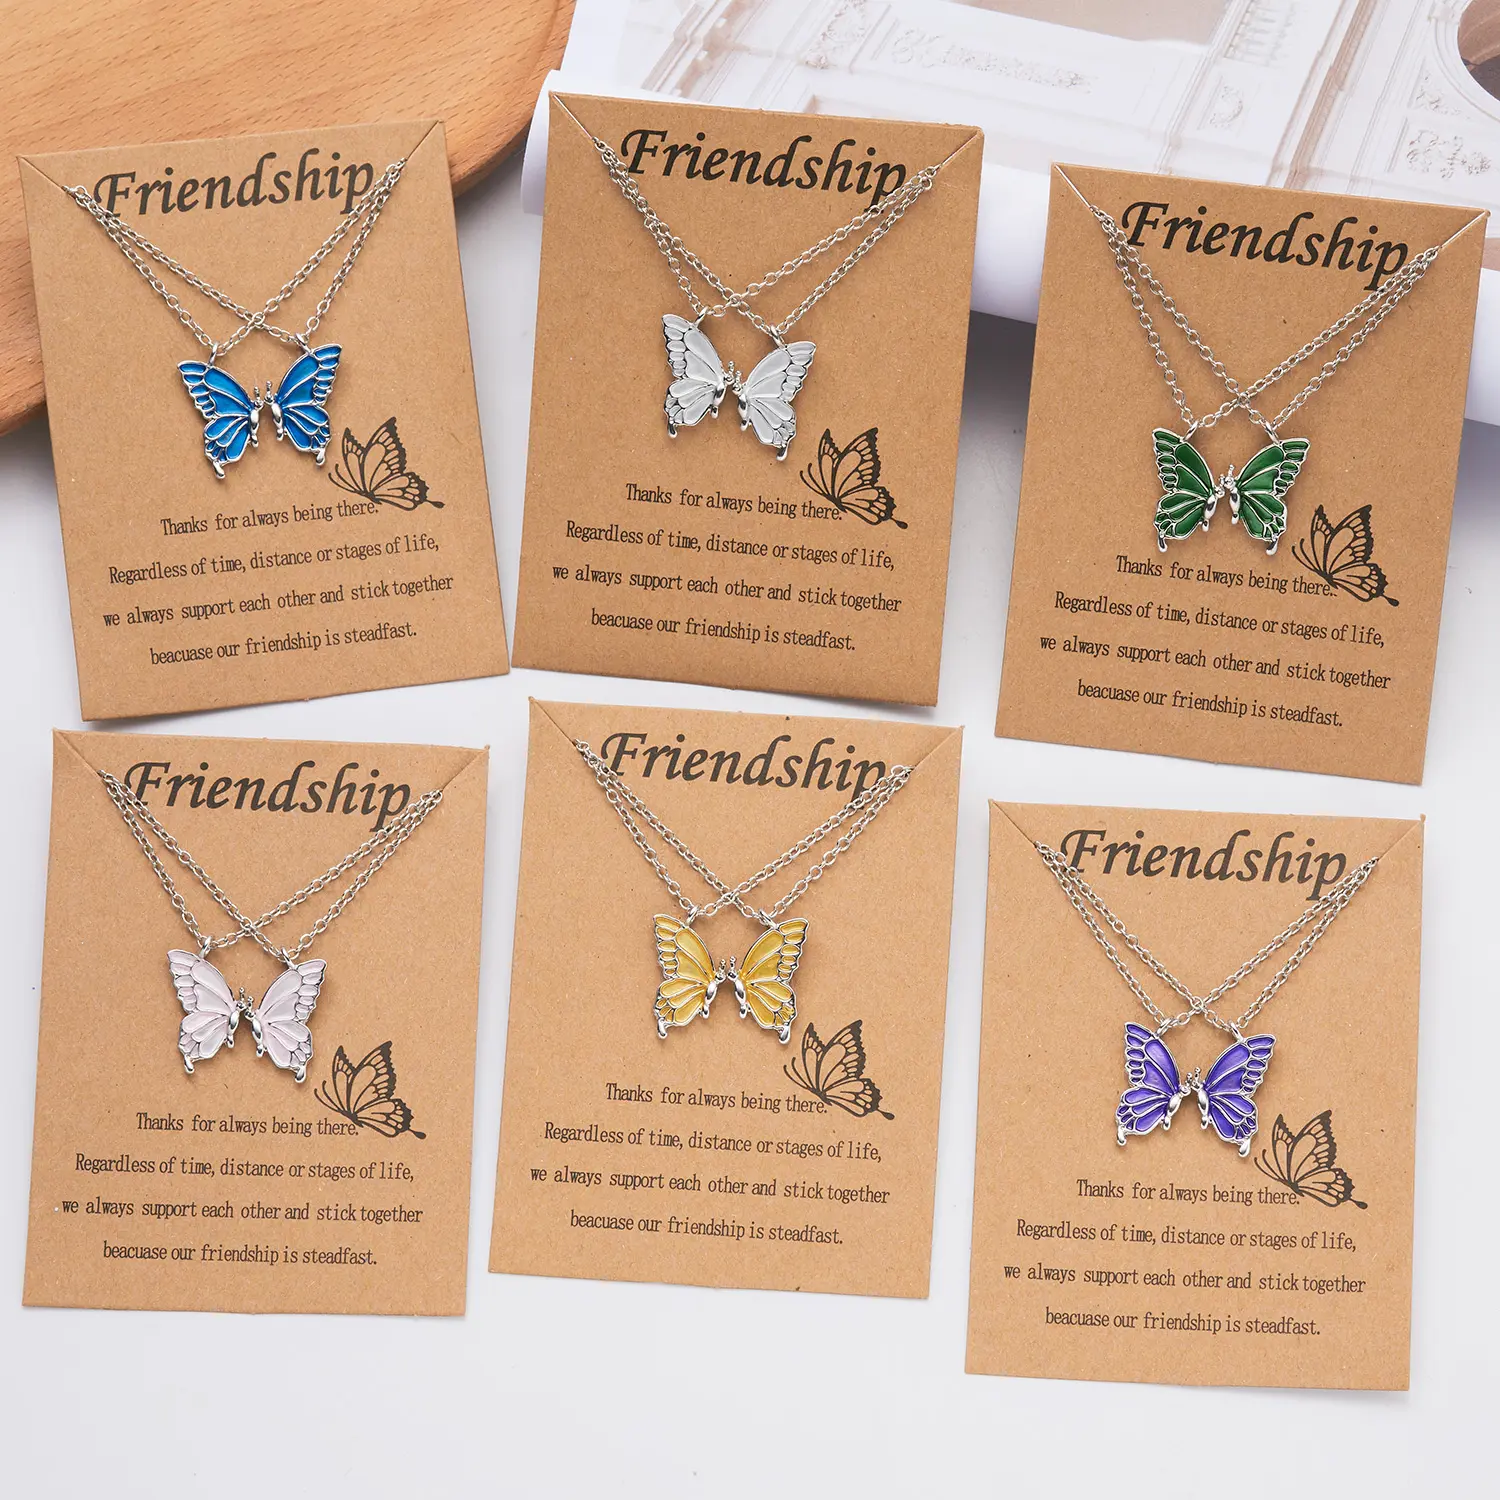 2 Pcs Butterfly Choker Necklace Korean Fashion Daisy Flower Clavicle Chain Necklaces Friendship BFF Rainbow Best Friend Jewelry